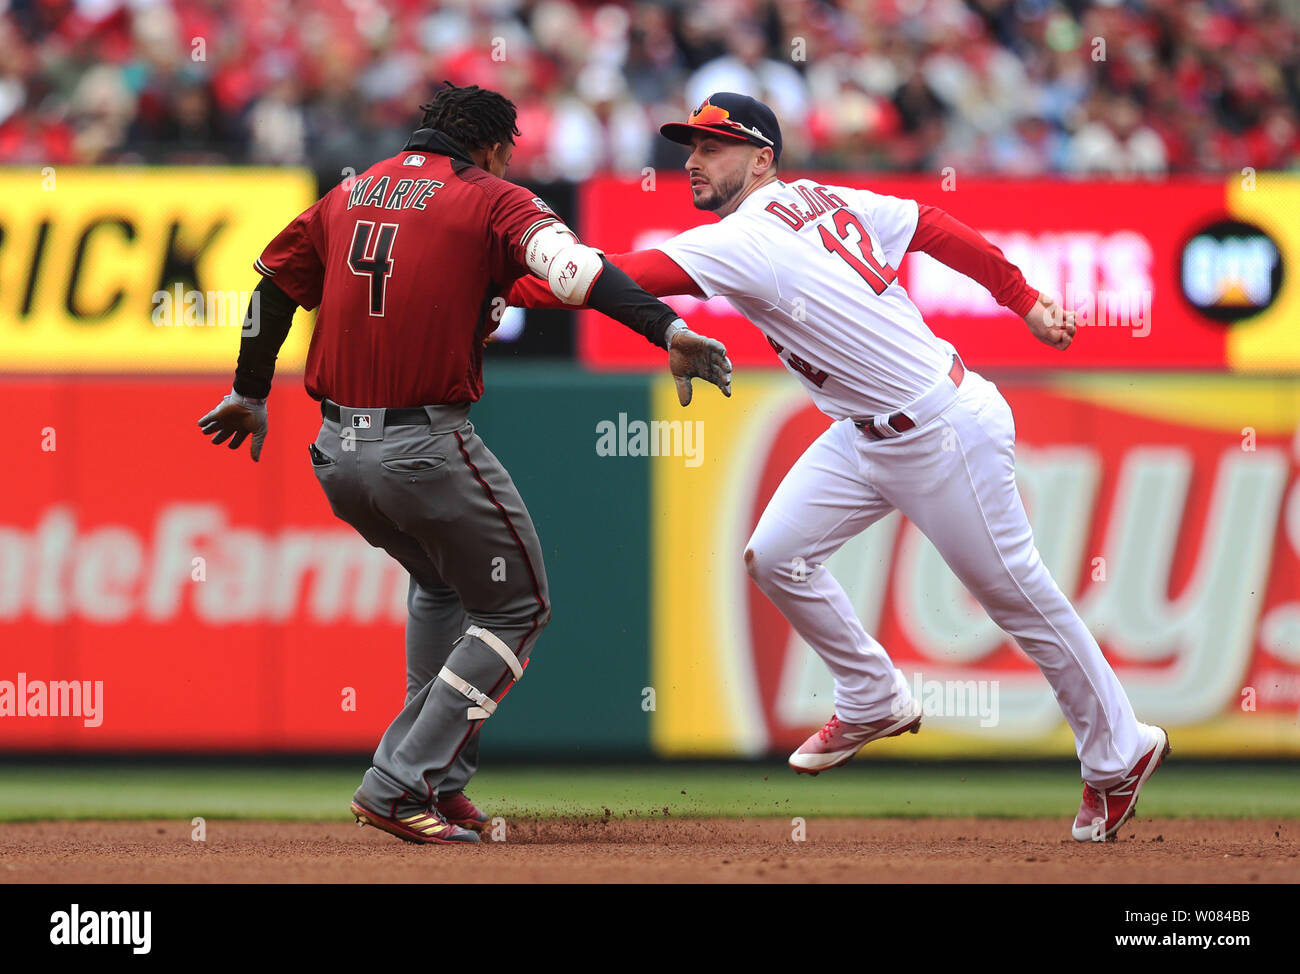 Arizona Diamondbacks Ketel Marte is tagged out by St. Louis Cardinals Paul DeJong after overrunning second base in the fourth inning at Busch Stadium in St. Louis on April 8, 2018.        Photo by Bill Greenblatt/UPI Stock Photo